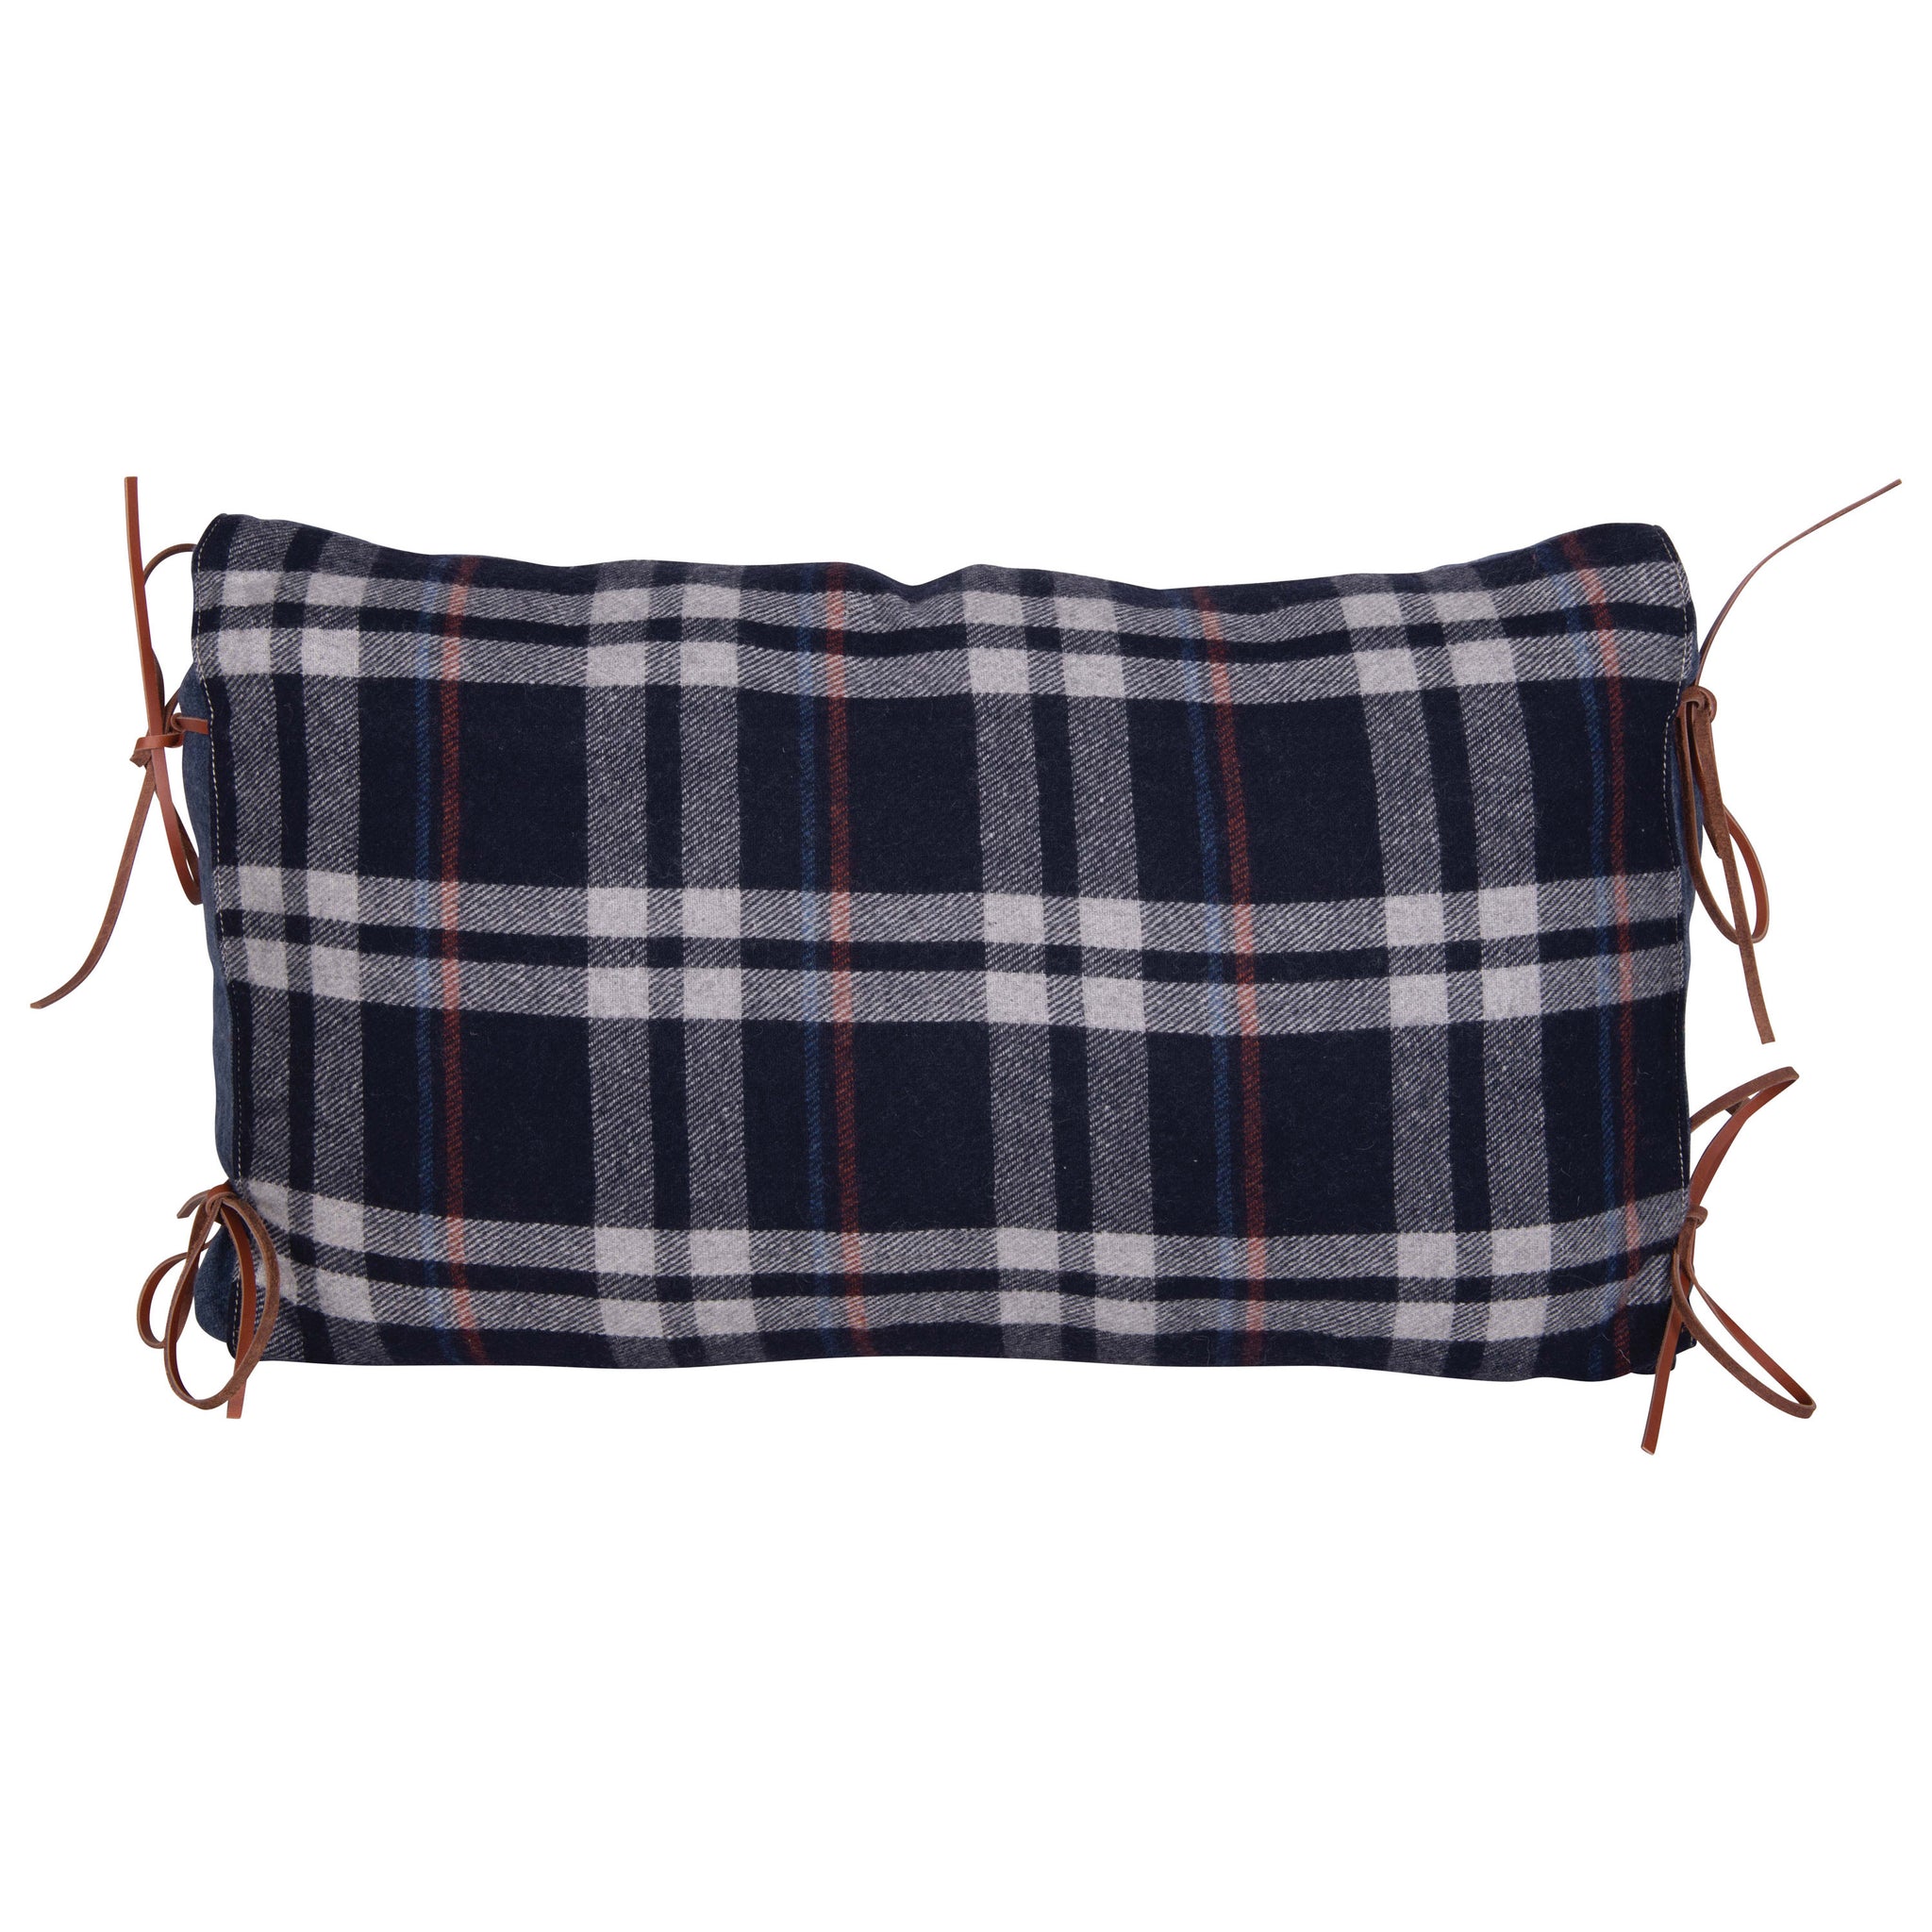 Cotton Flannel Lumbar Pillow with Leather Ties, Plaid